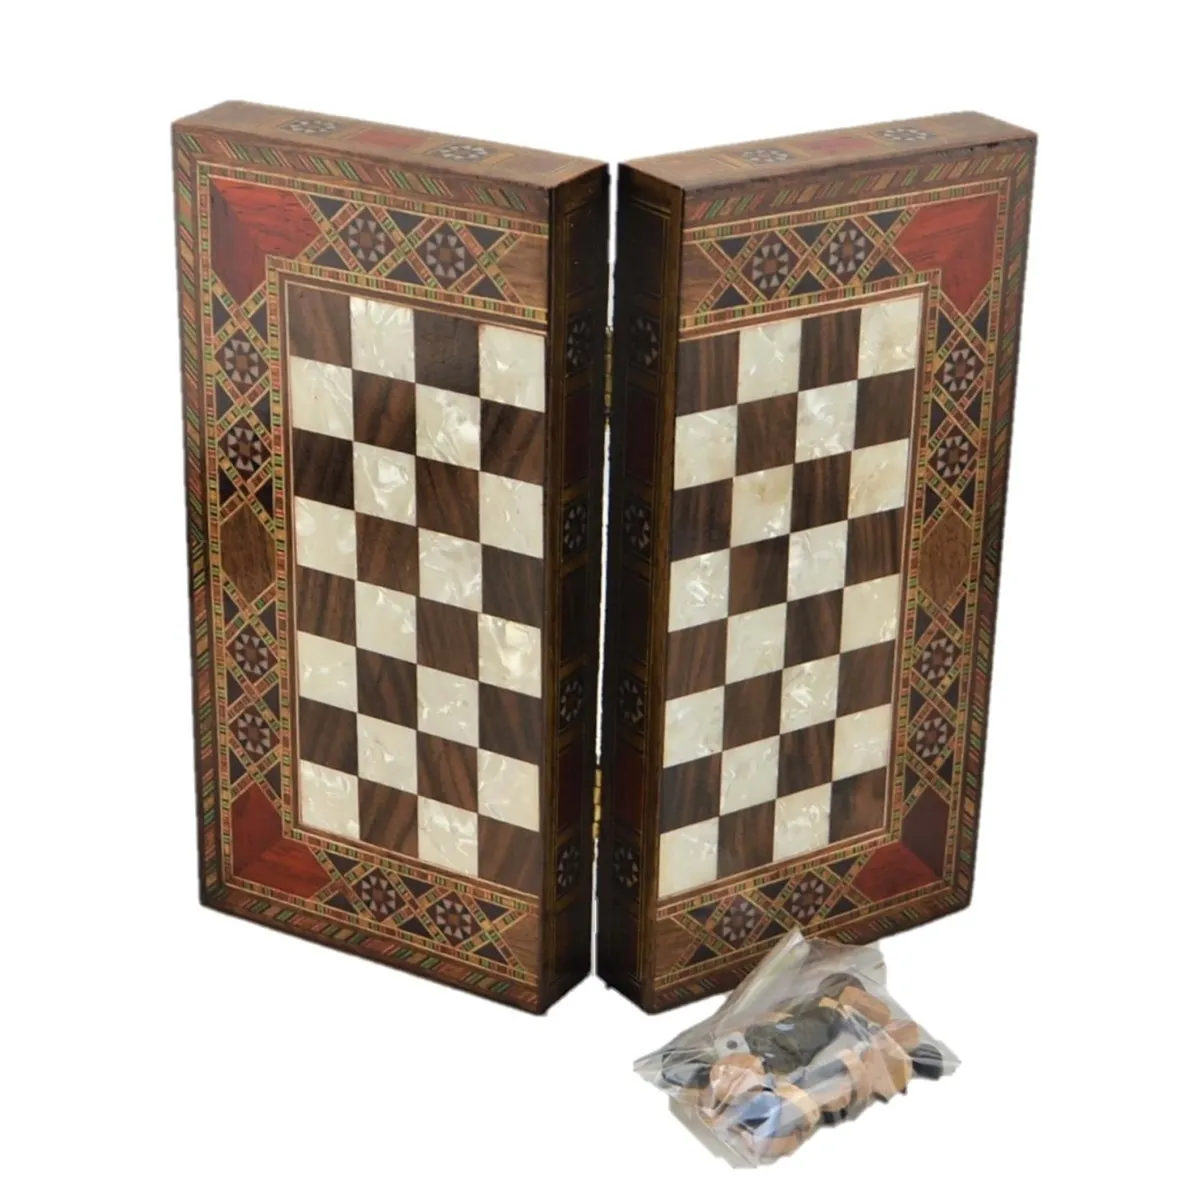 Handmade Wooden Backgammon Walnut-Rosewood Mini Size Antique Design Checkers Chessboard 22x11cm Traditional Game Board Game Gift